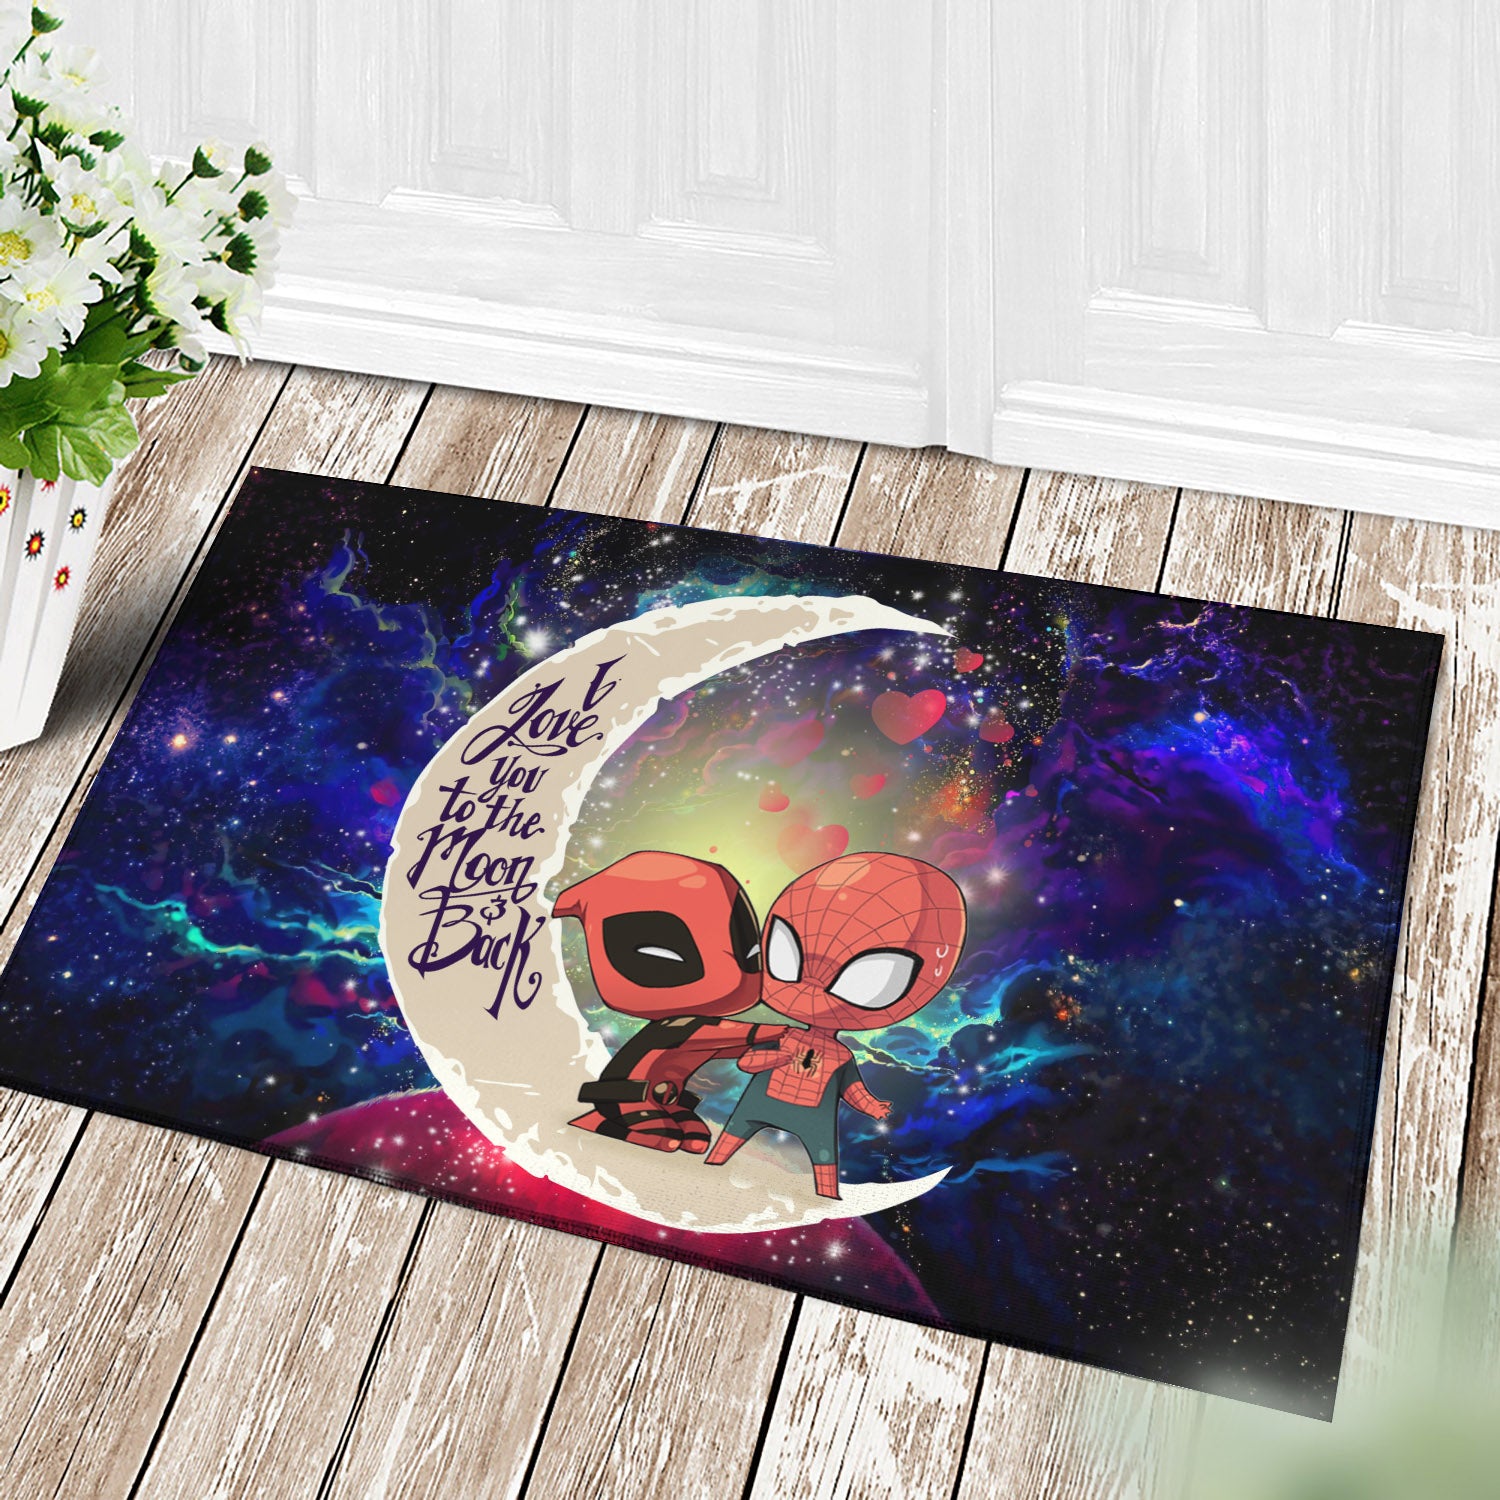 Spiderman And Deadpool Couple Love You To The Moon Galaxy Back Door Mats Home Decor